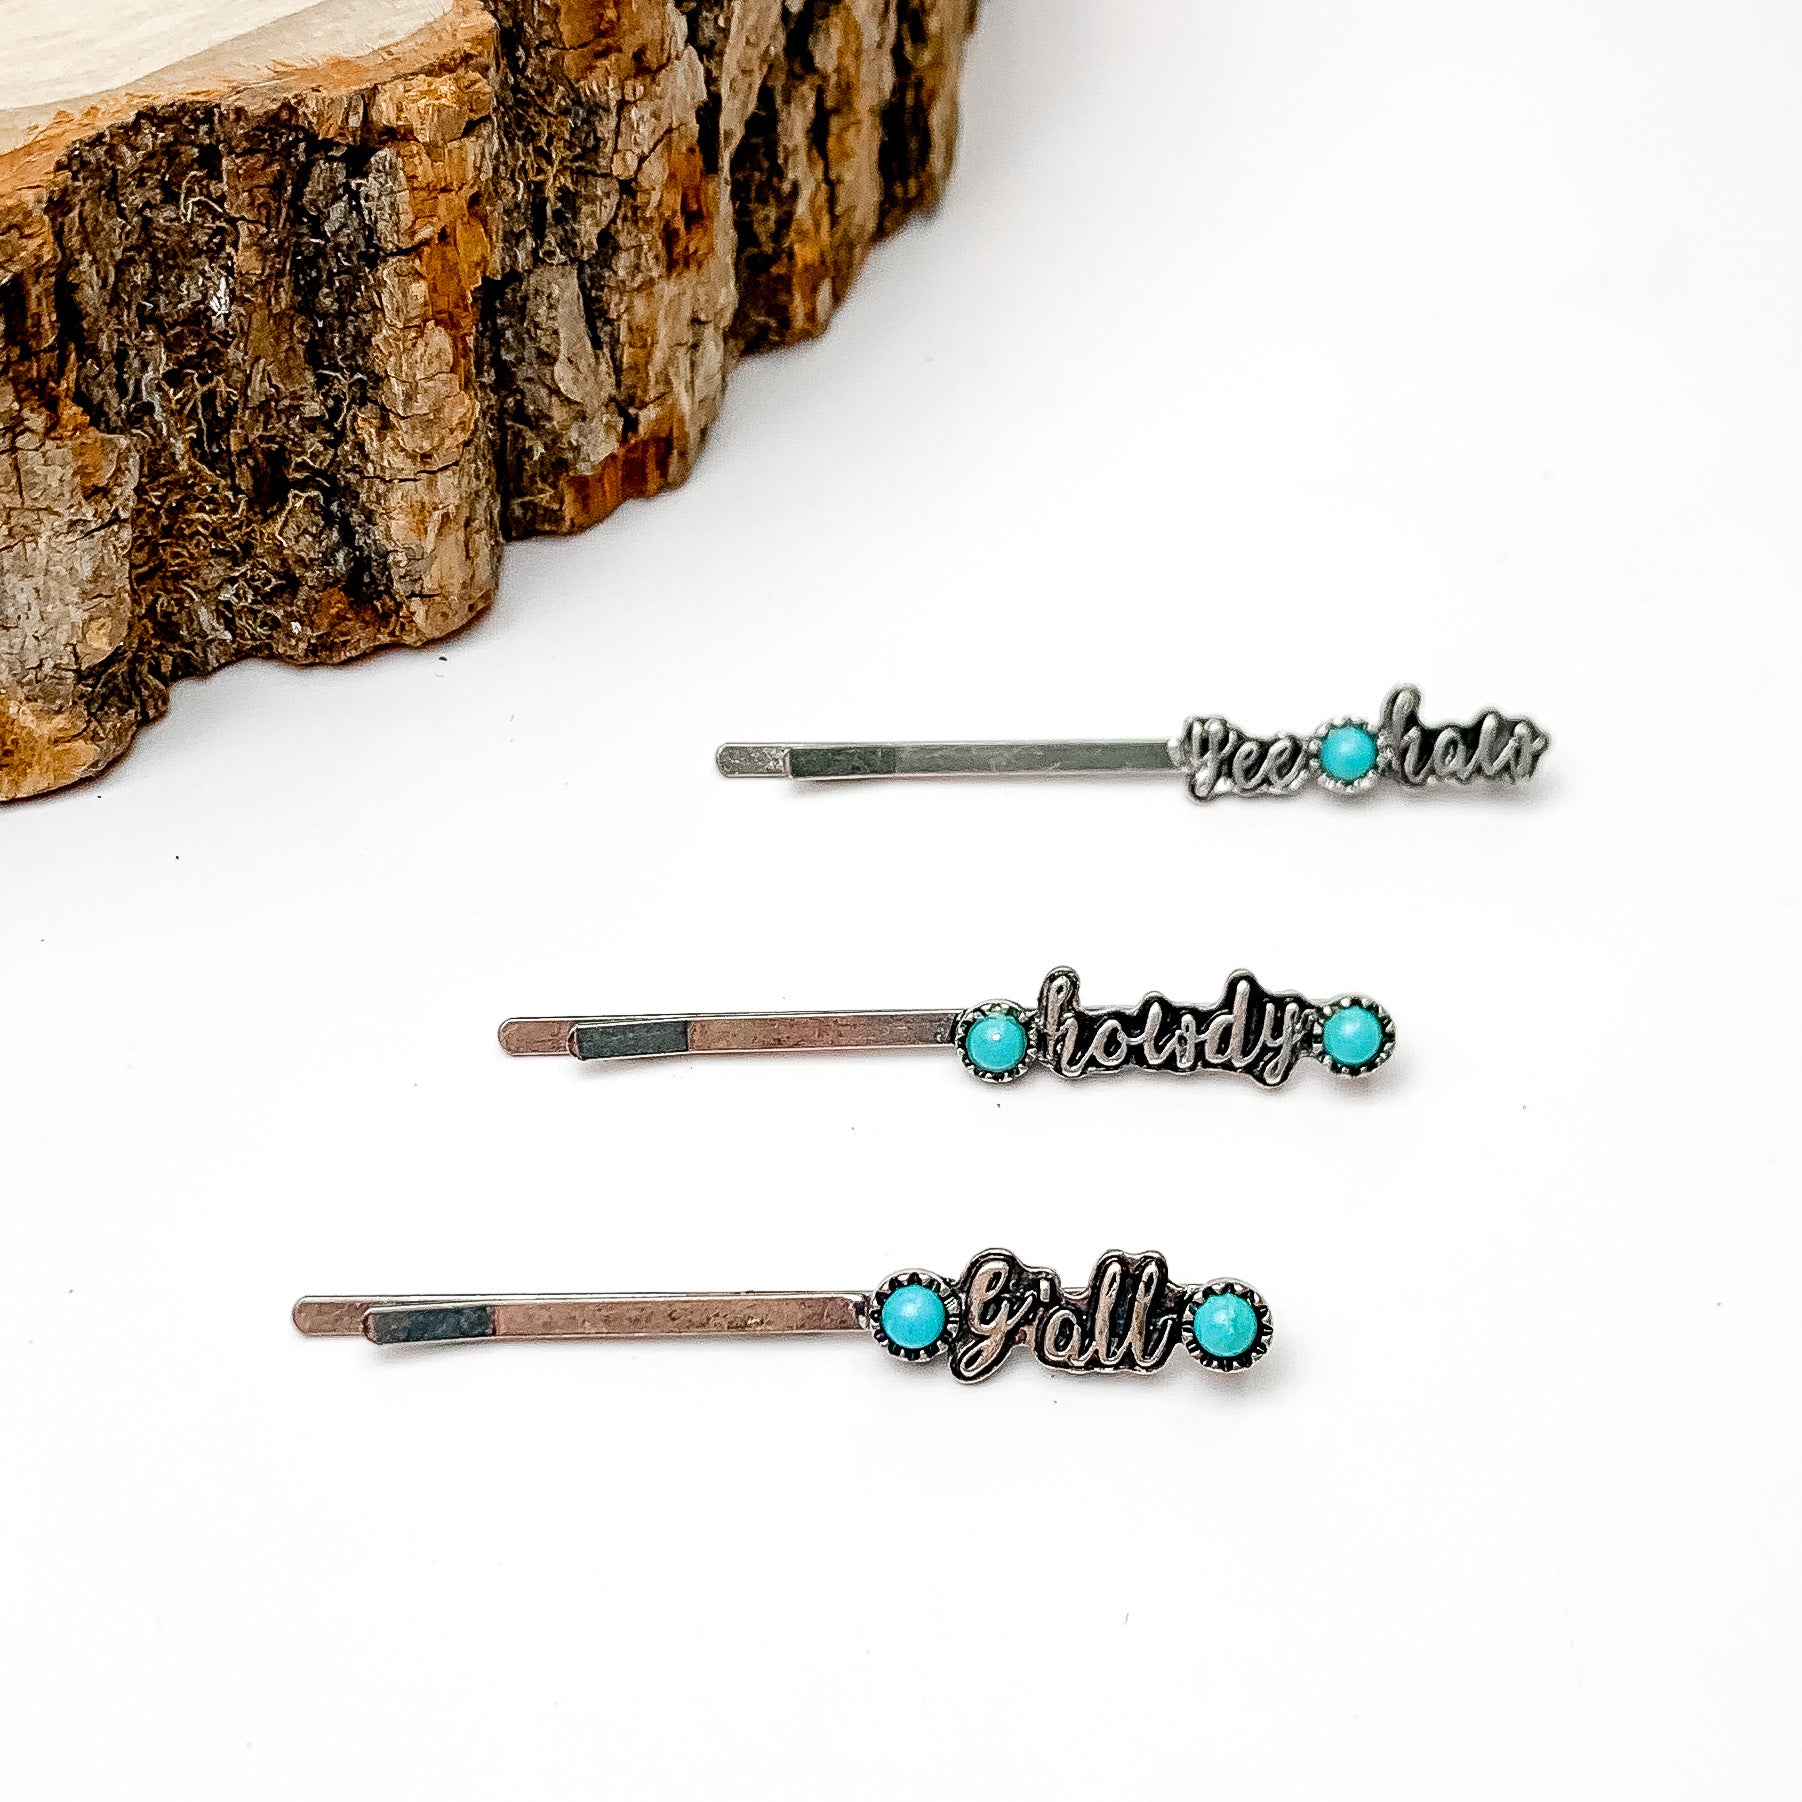 Pictured are three silver hair pins with cursive word pendants. One has the "yee-haw," one has "howdy," and one has "y'all" in cursive ad each has one or two turquoise stones. These hair pins are pictured on a white background with a piece of wood in the top left corner. 